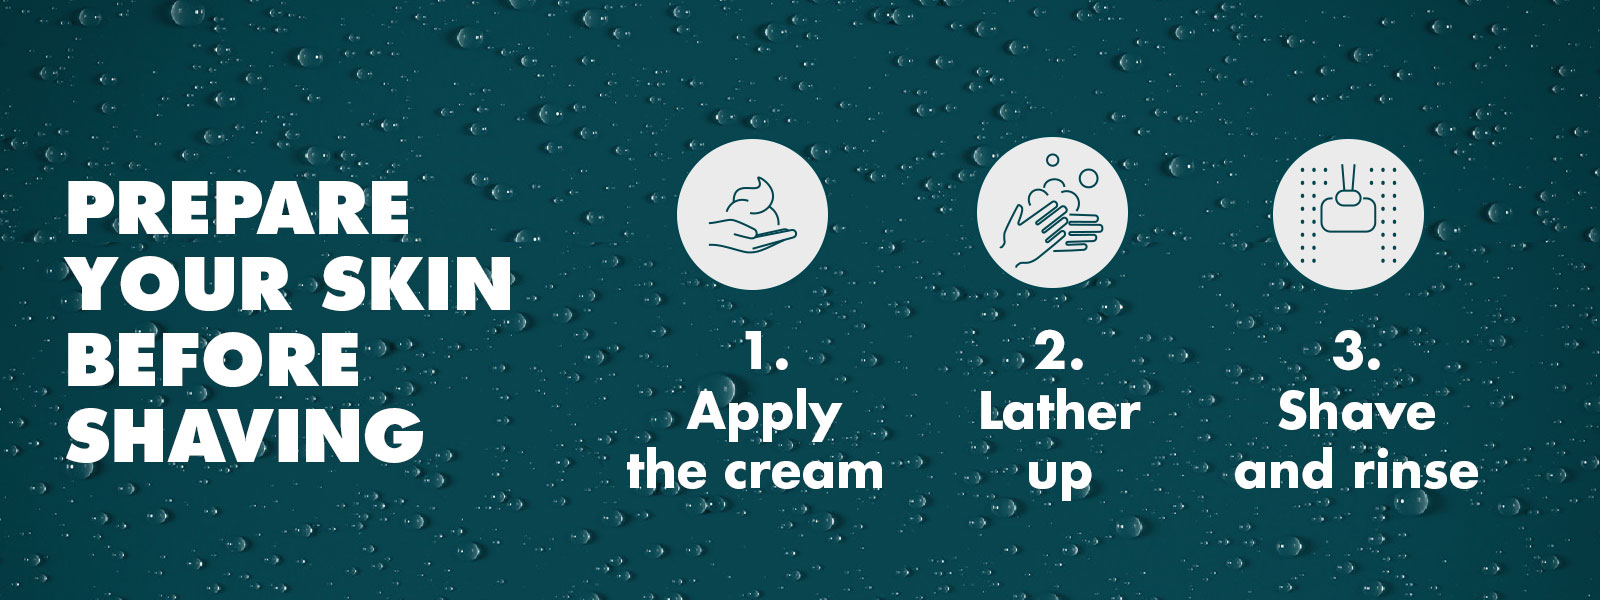 Prepare your skin before shaving. 1. Apply the cream. 2. Lather up. 3. Shave and rinse.